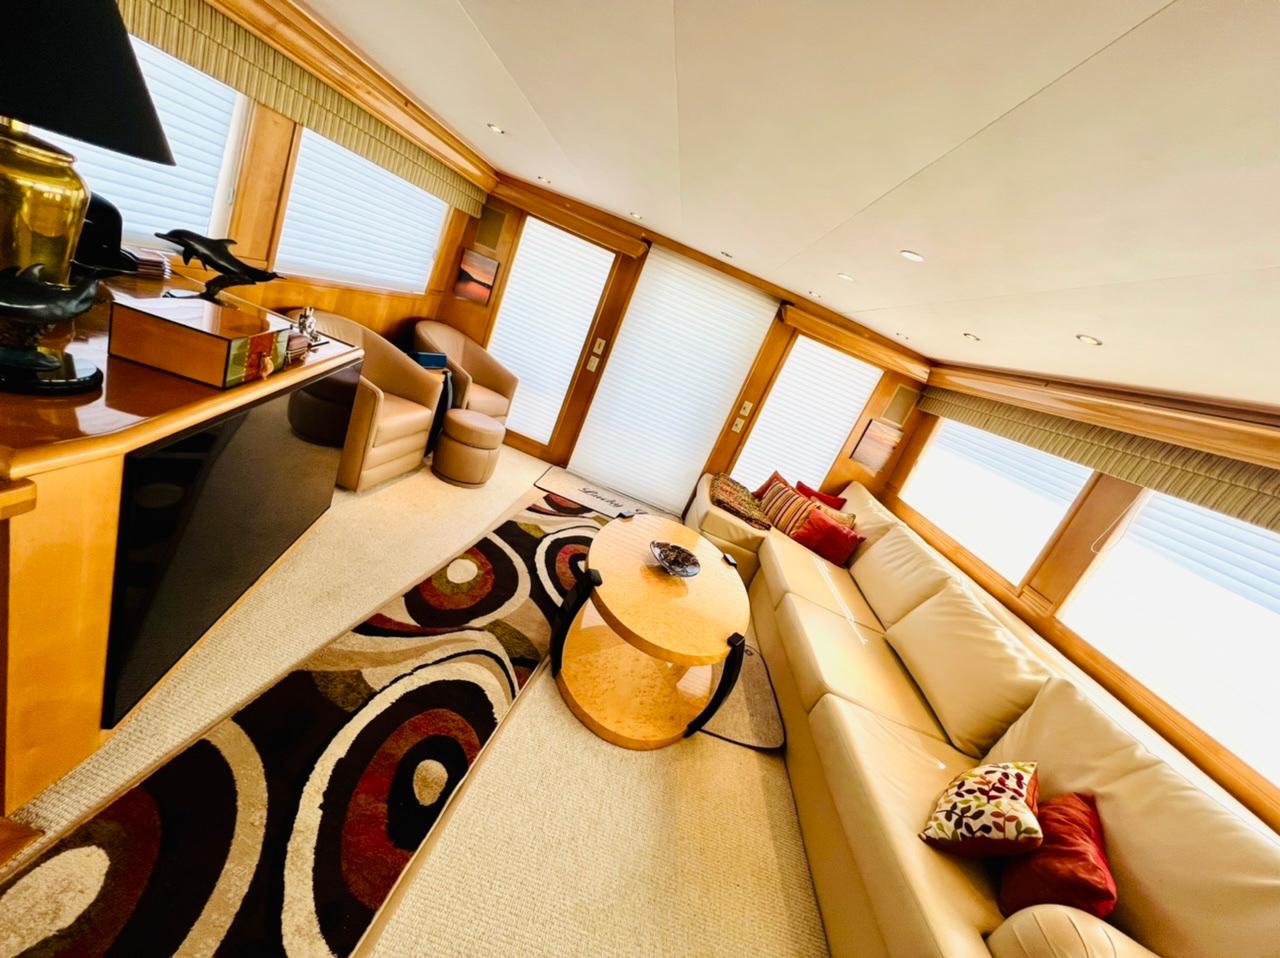 Main Salon - Looking Aft w/ Blinds Down